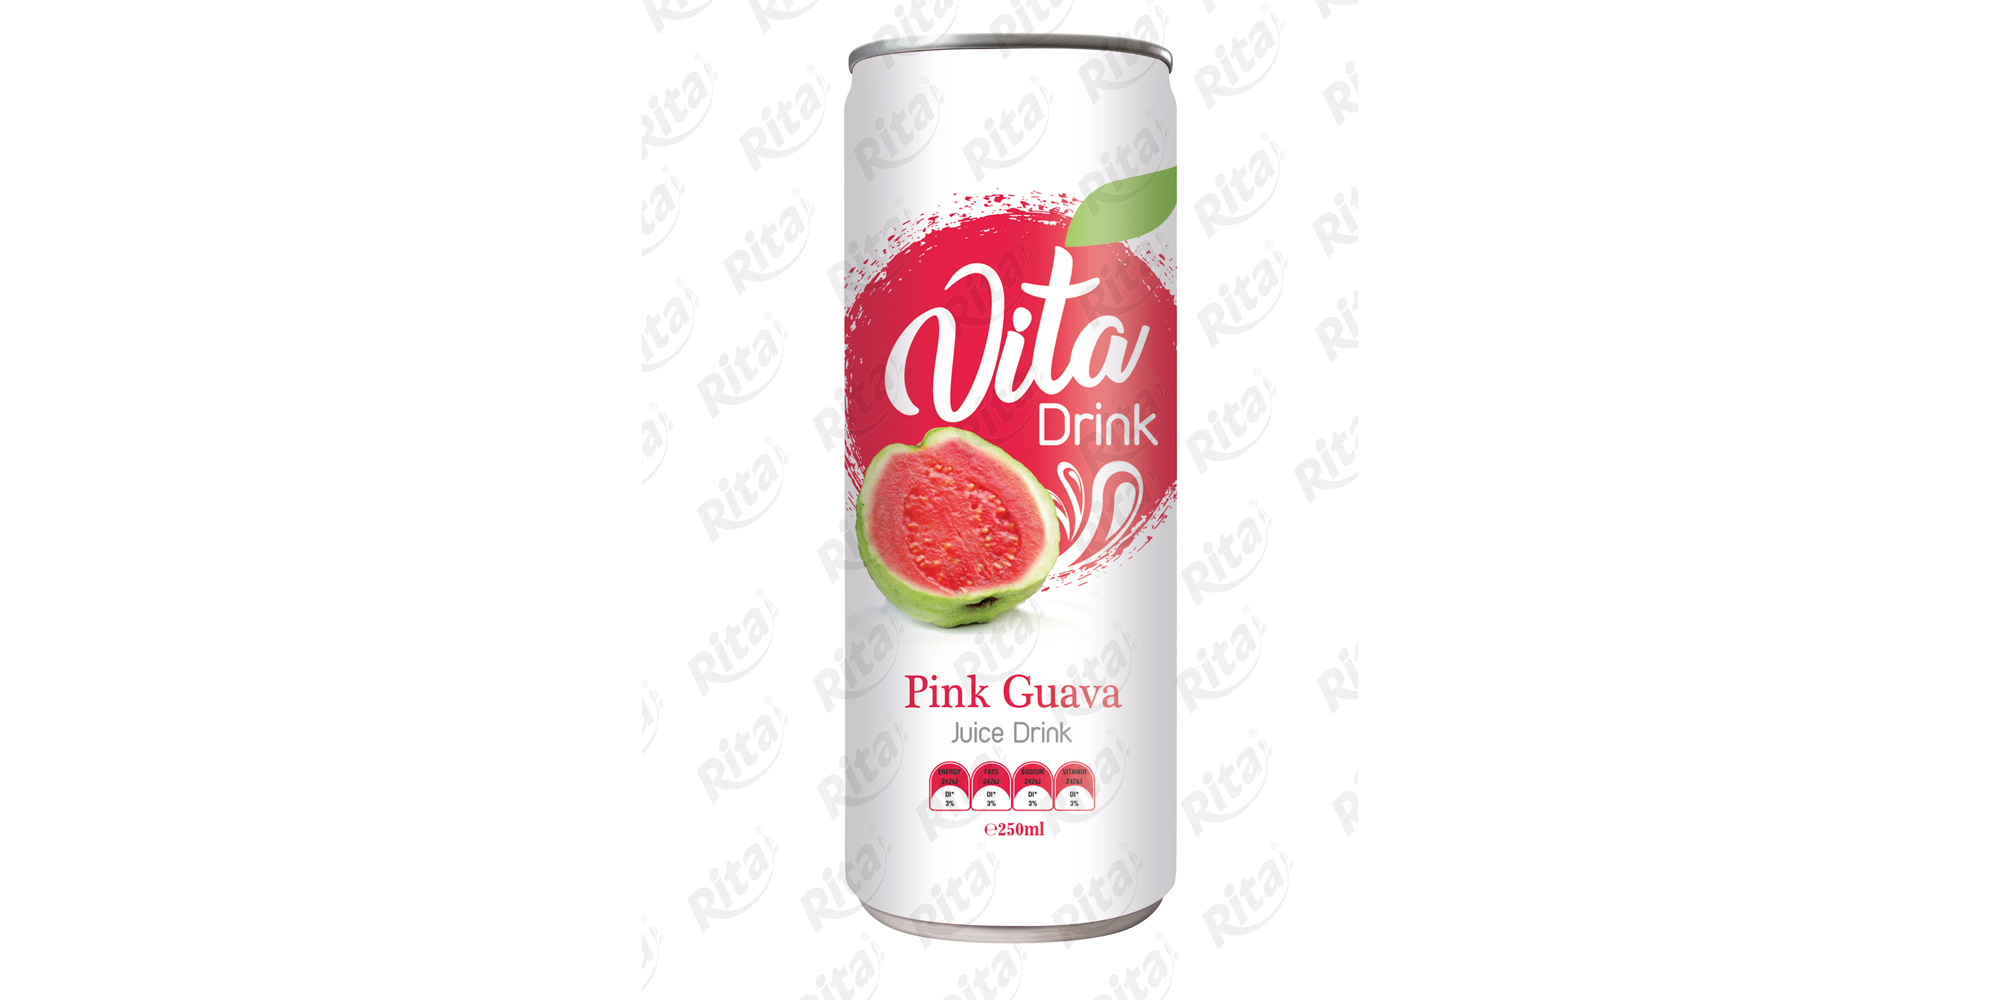 pink guava juice drink 250ml from RITA US